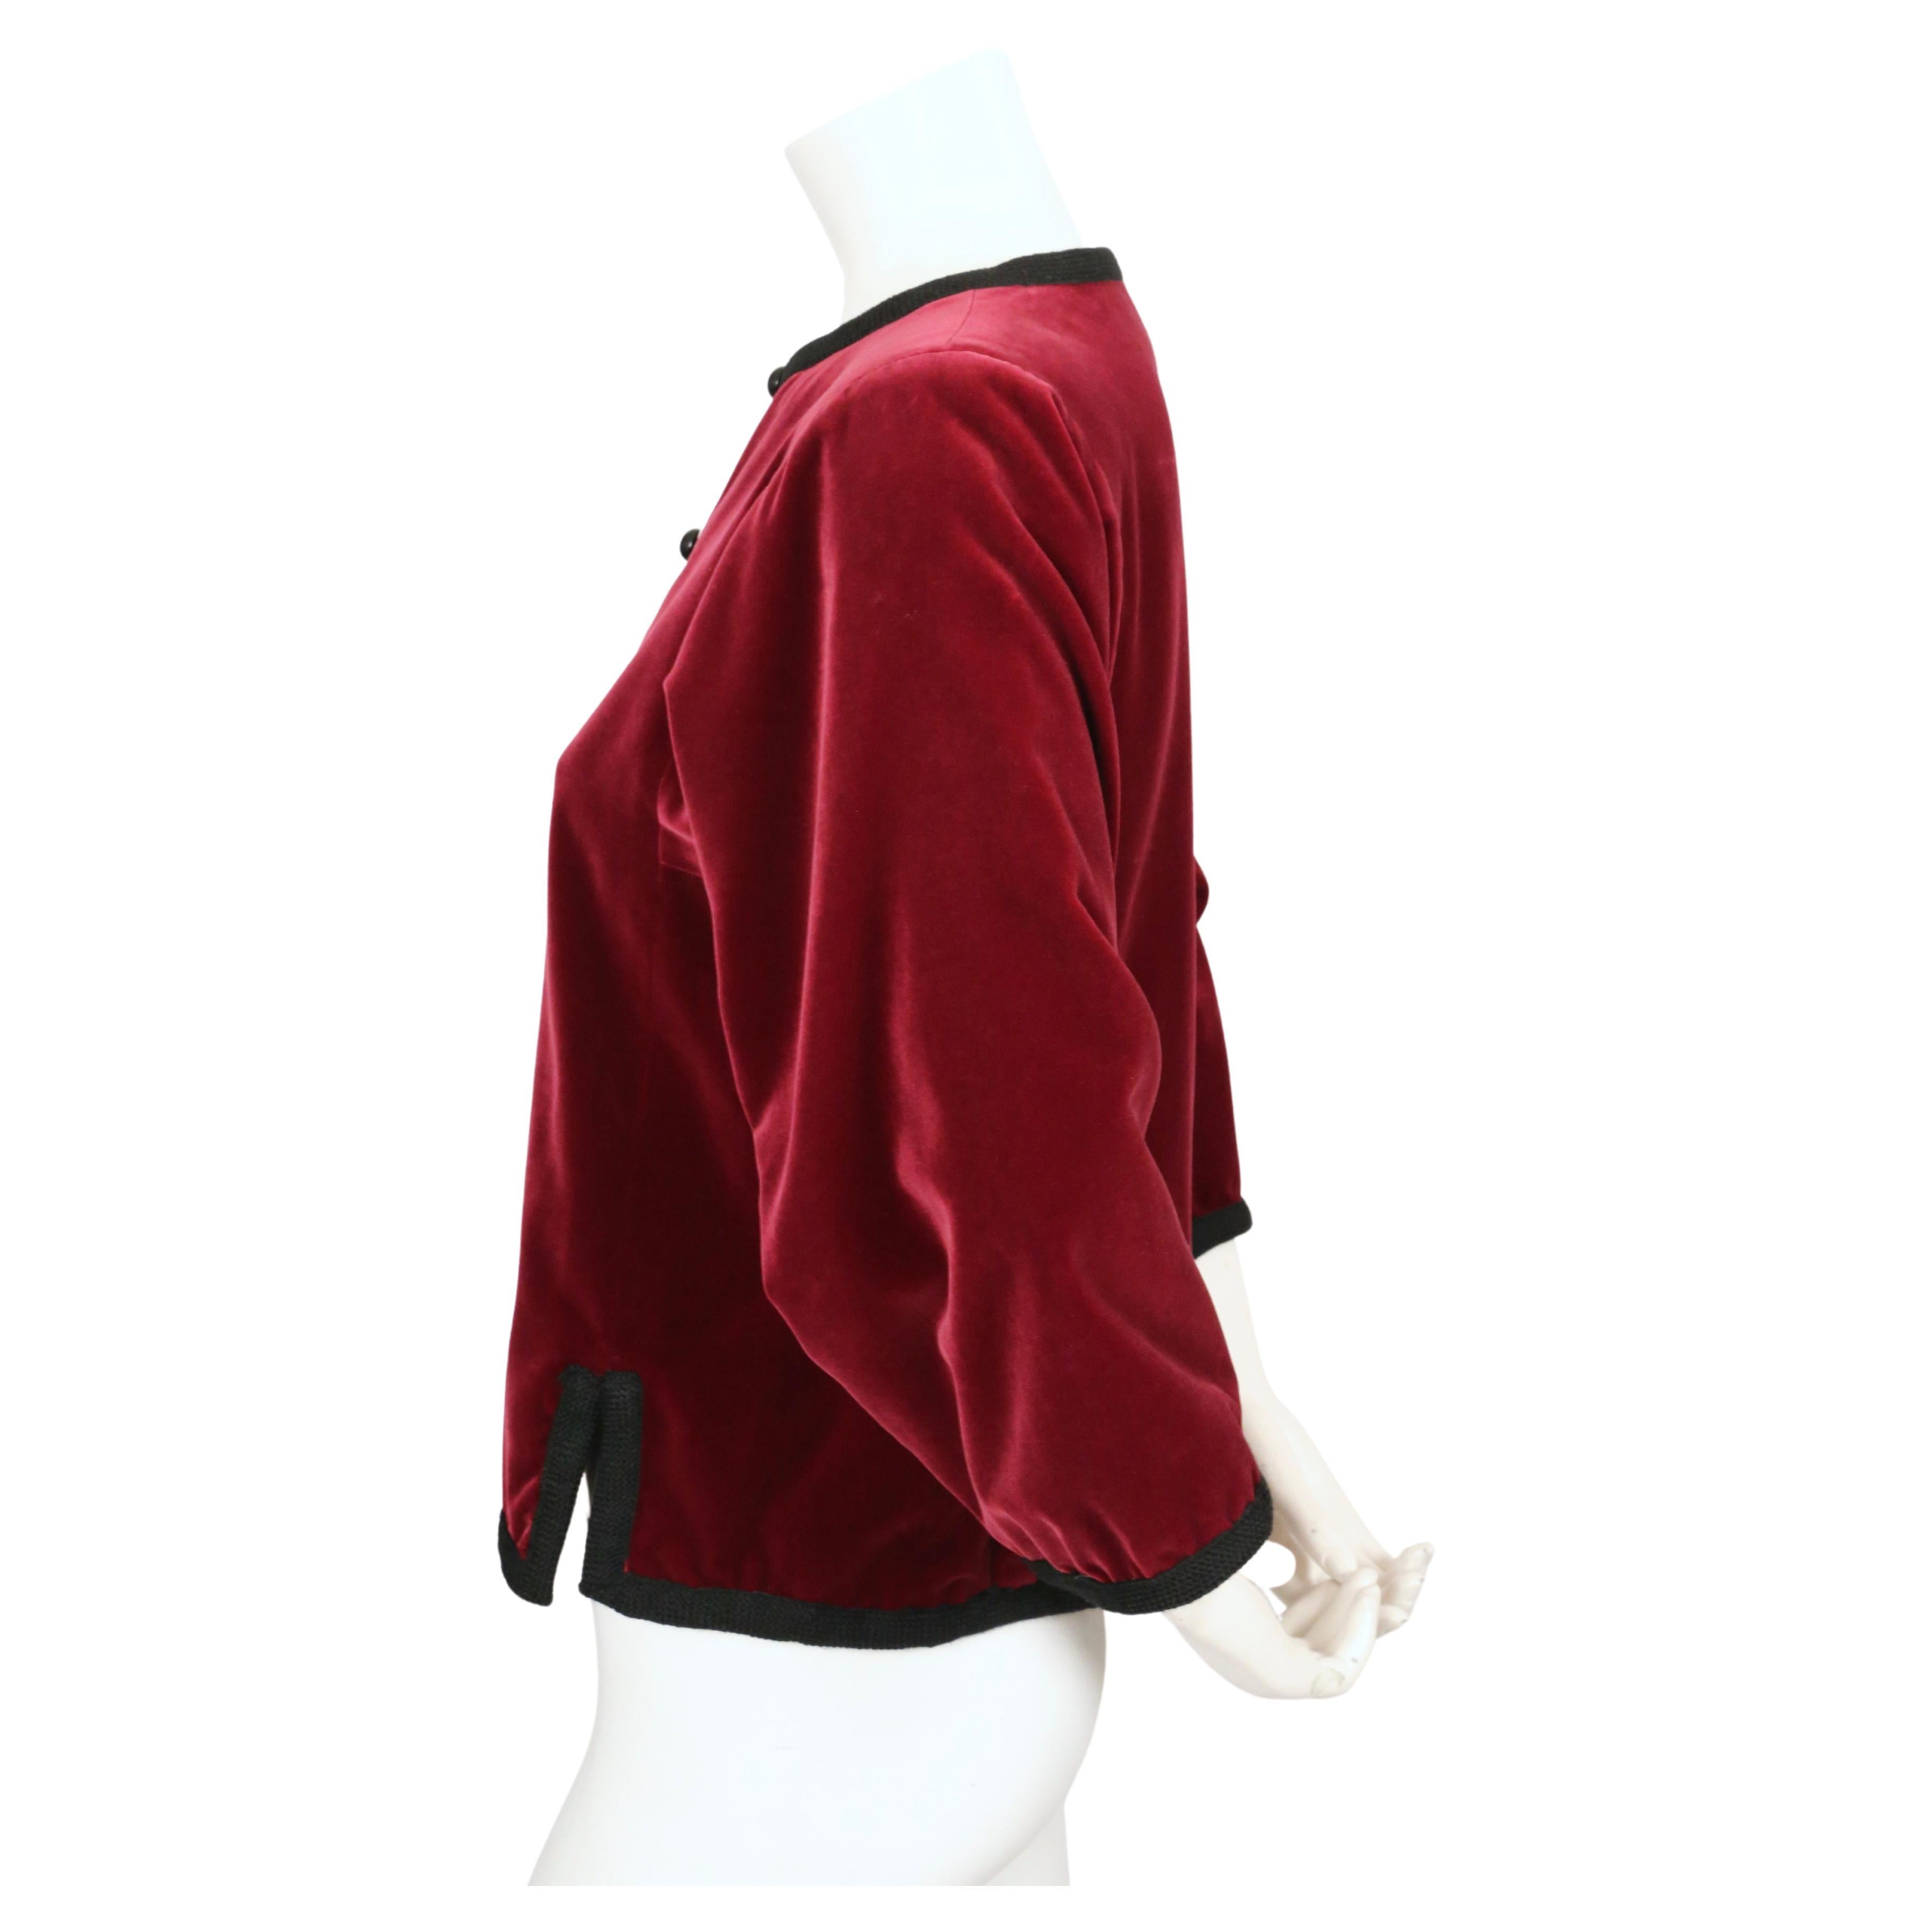 Rich burgundy, velvet jacket with black woven wool trim designed by Yves Saint Laurent dating to fall of 1976 as seen on the runway.  Jacket has full sleeves and slits a front his. Jacket size is unlabeled however it best fits a petite 2 to 4.